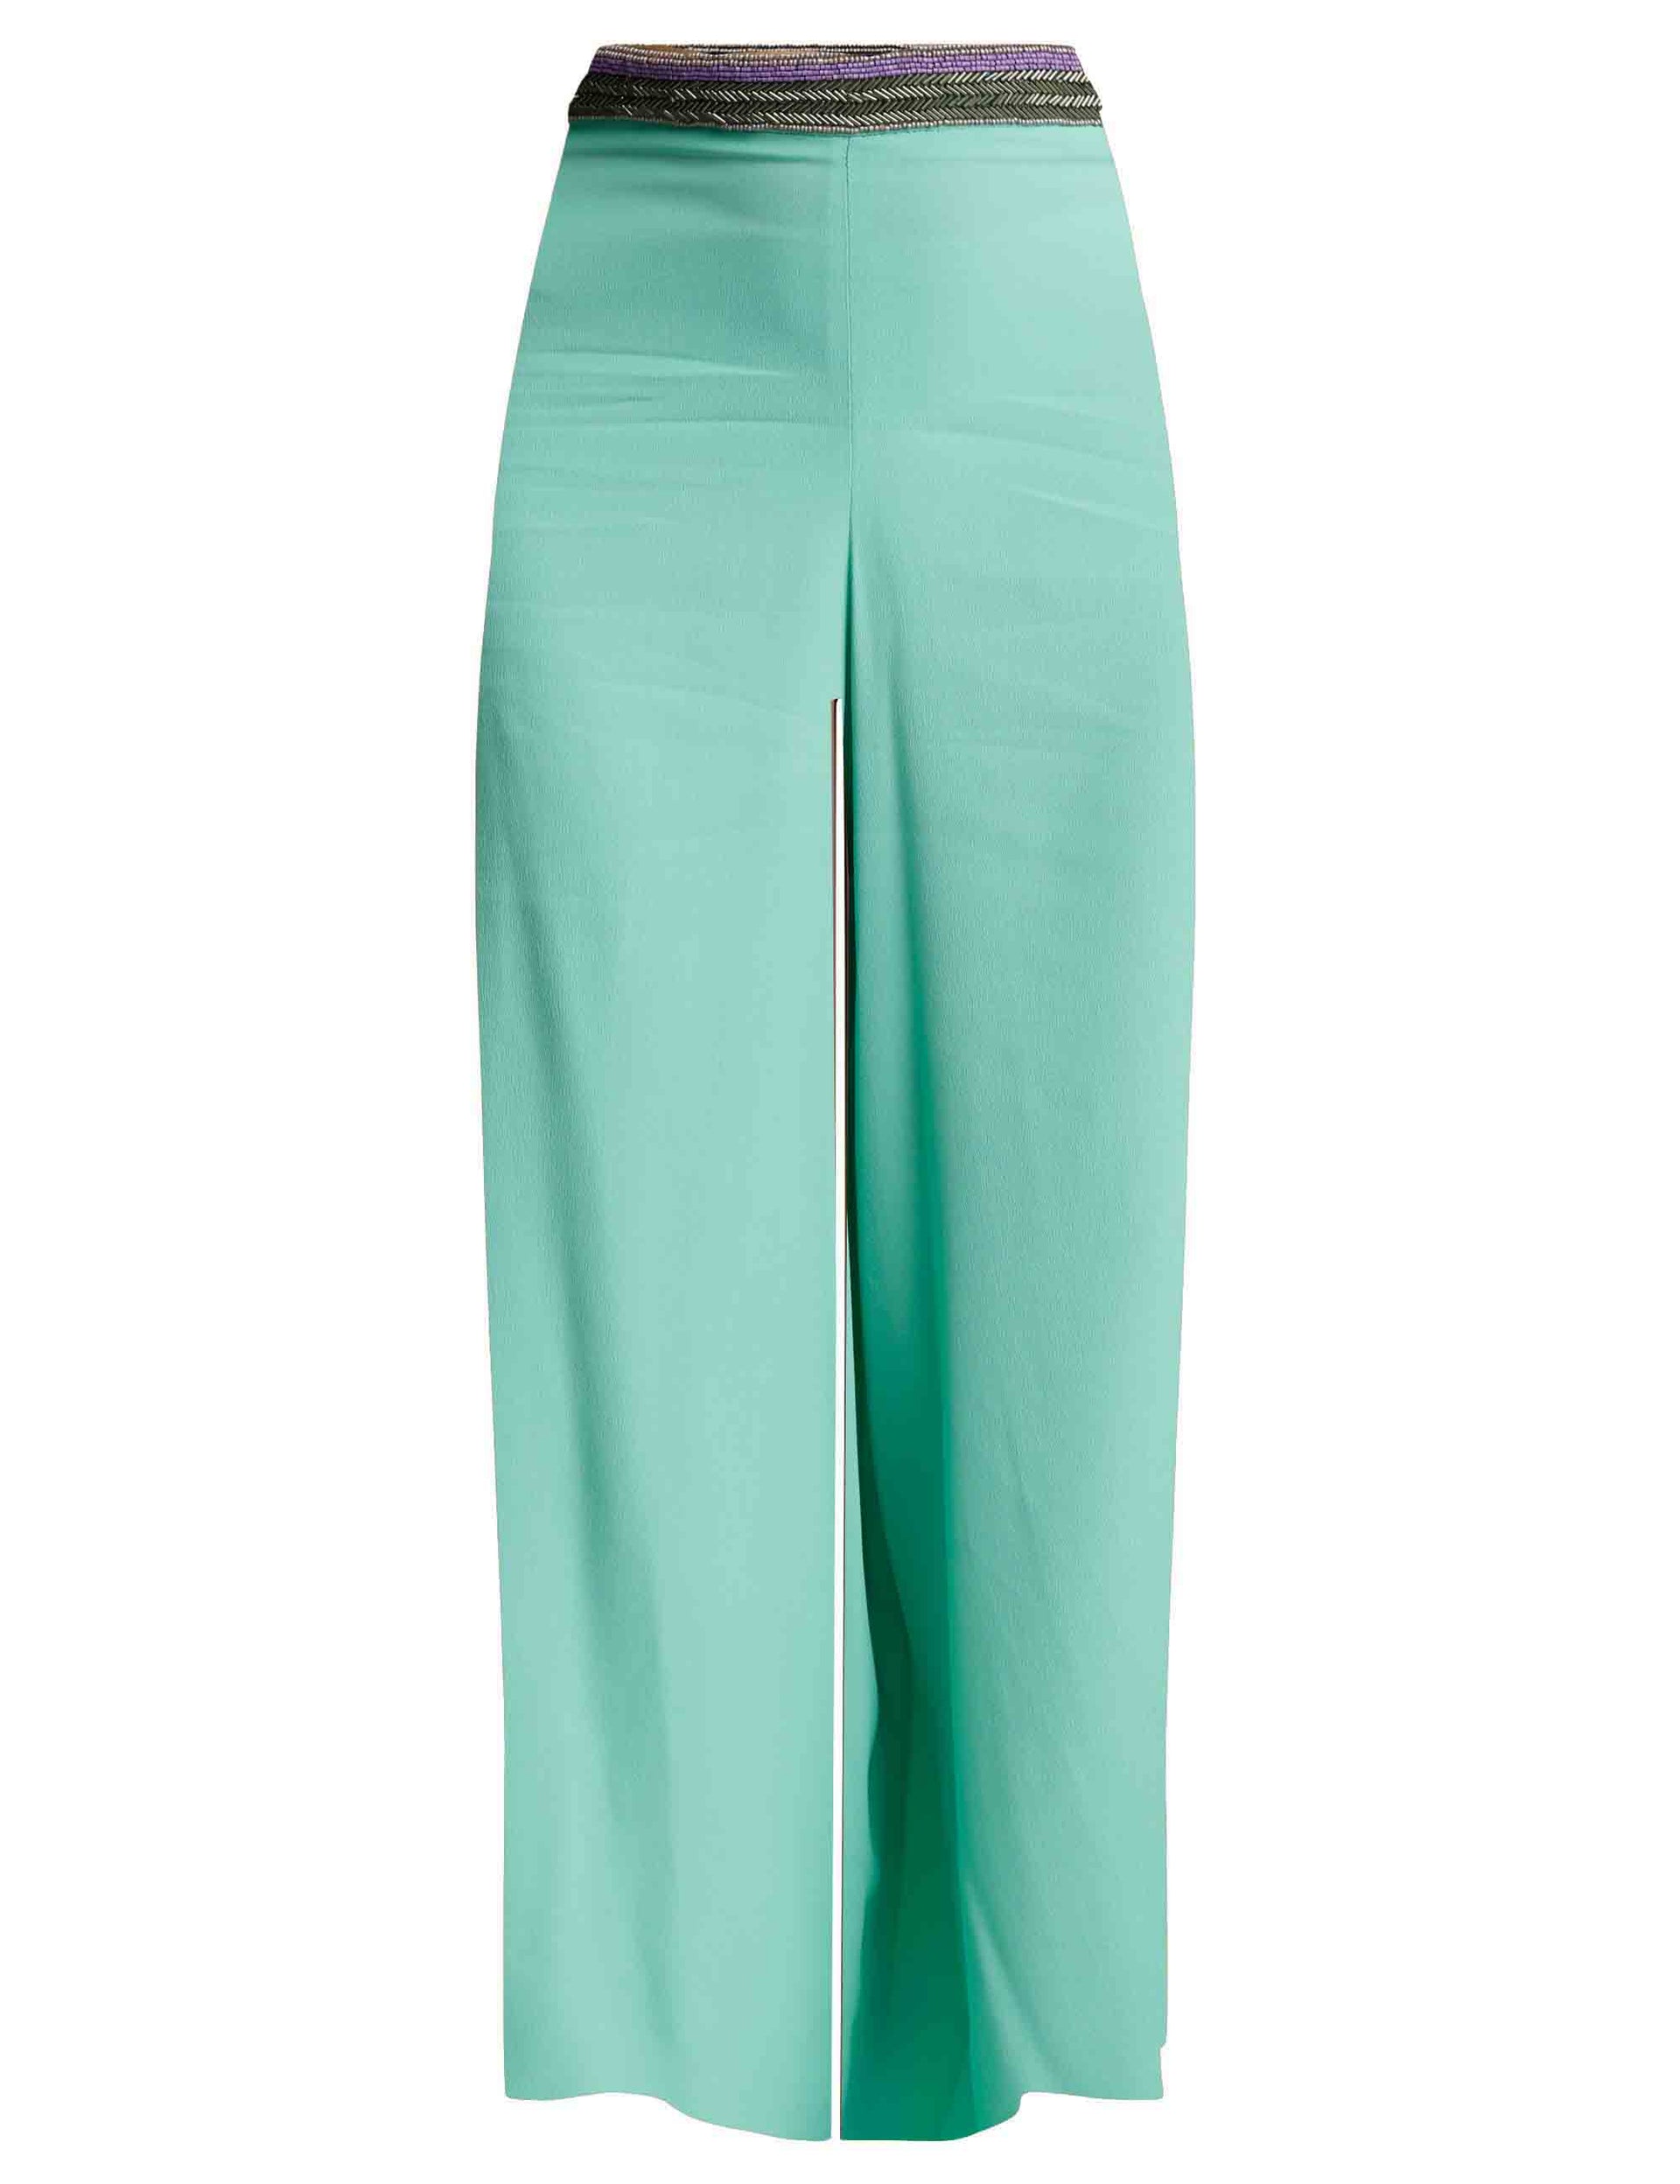 Fluide Crepe women's trousers in green silk with embroidered belt